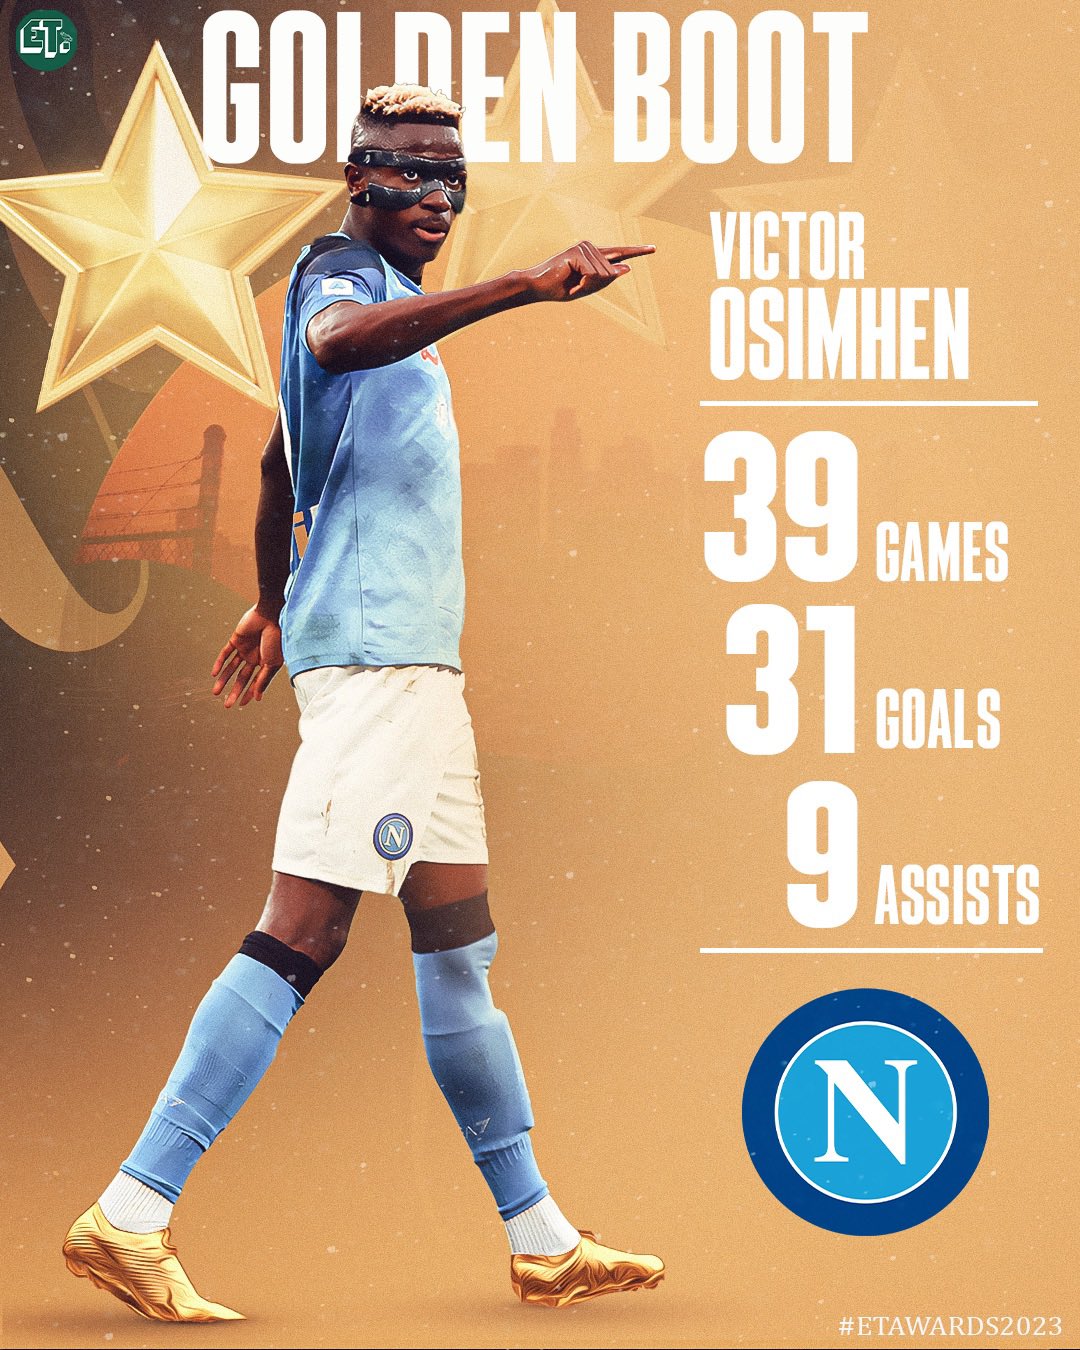 Victor Osimhen claims Nigerian Golden Boot at EaglesTracker Awards 2023